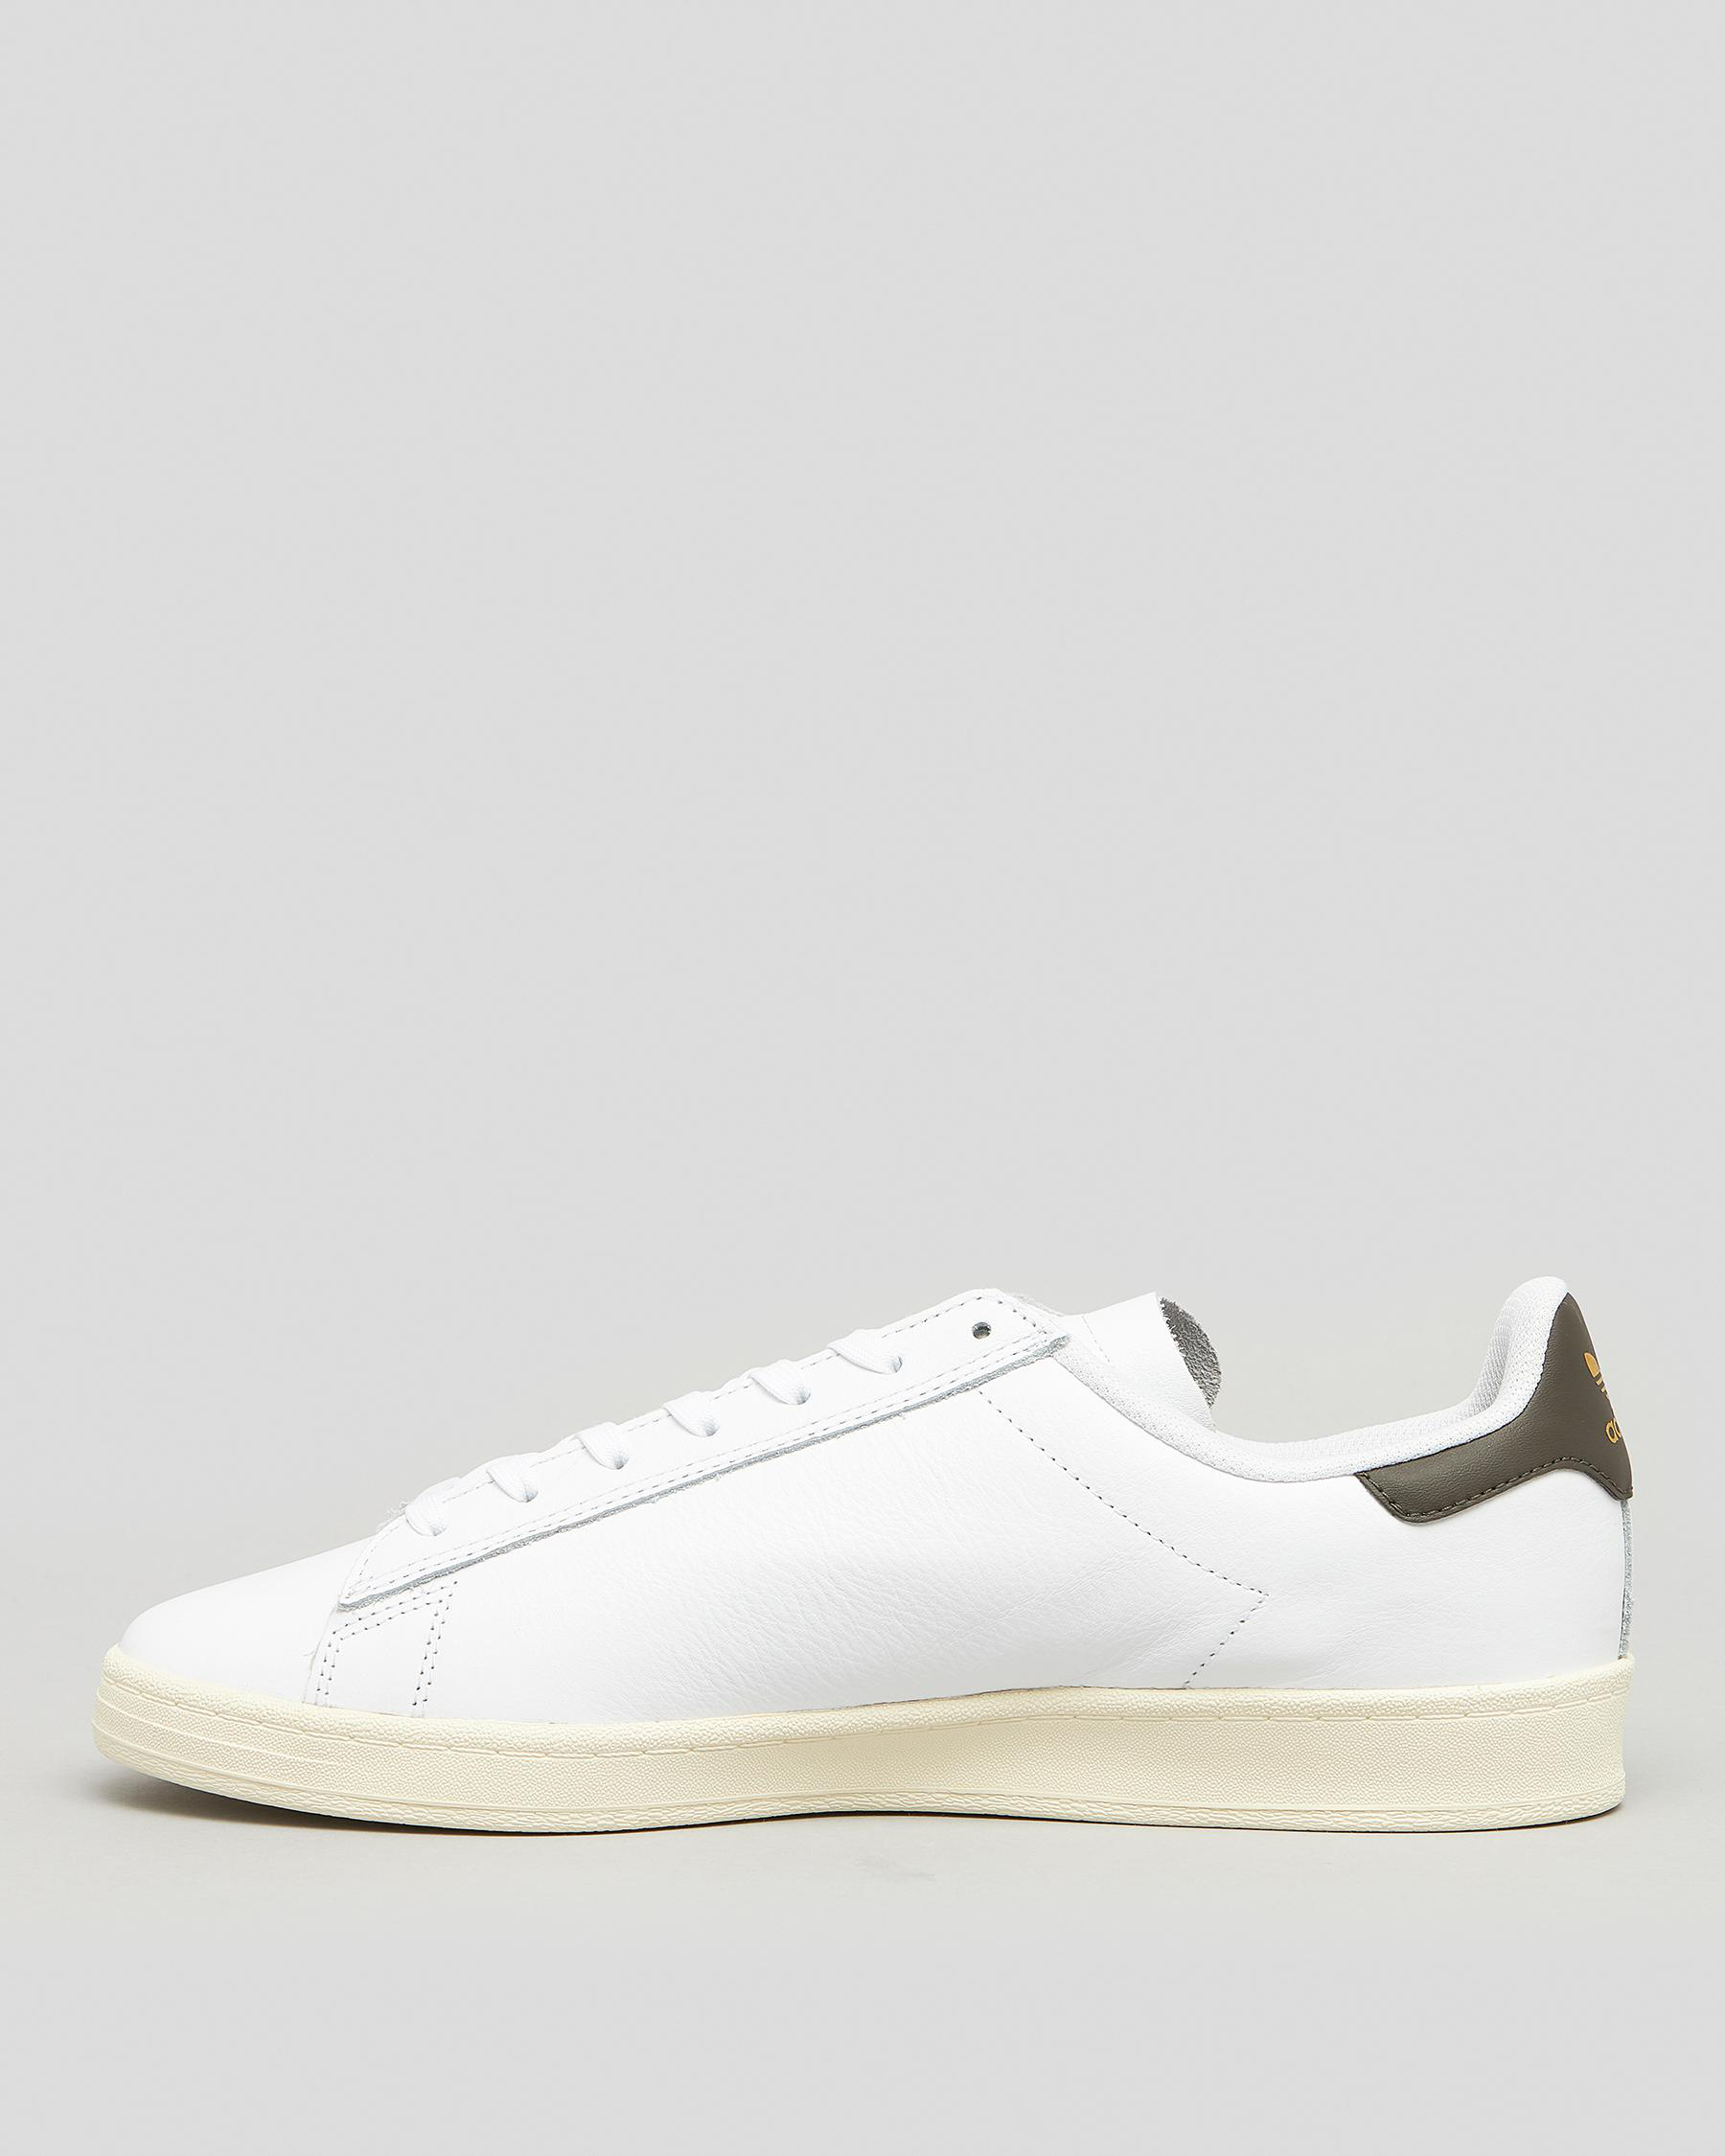 Adidas Campus ADV Shoes In Ftwr White/ftwr White/shadow O - Fast ...